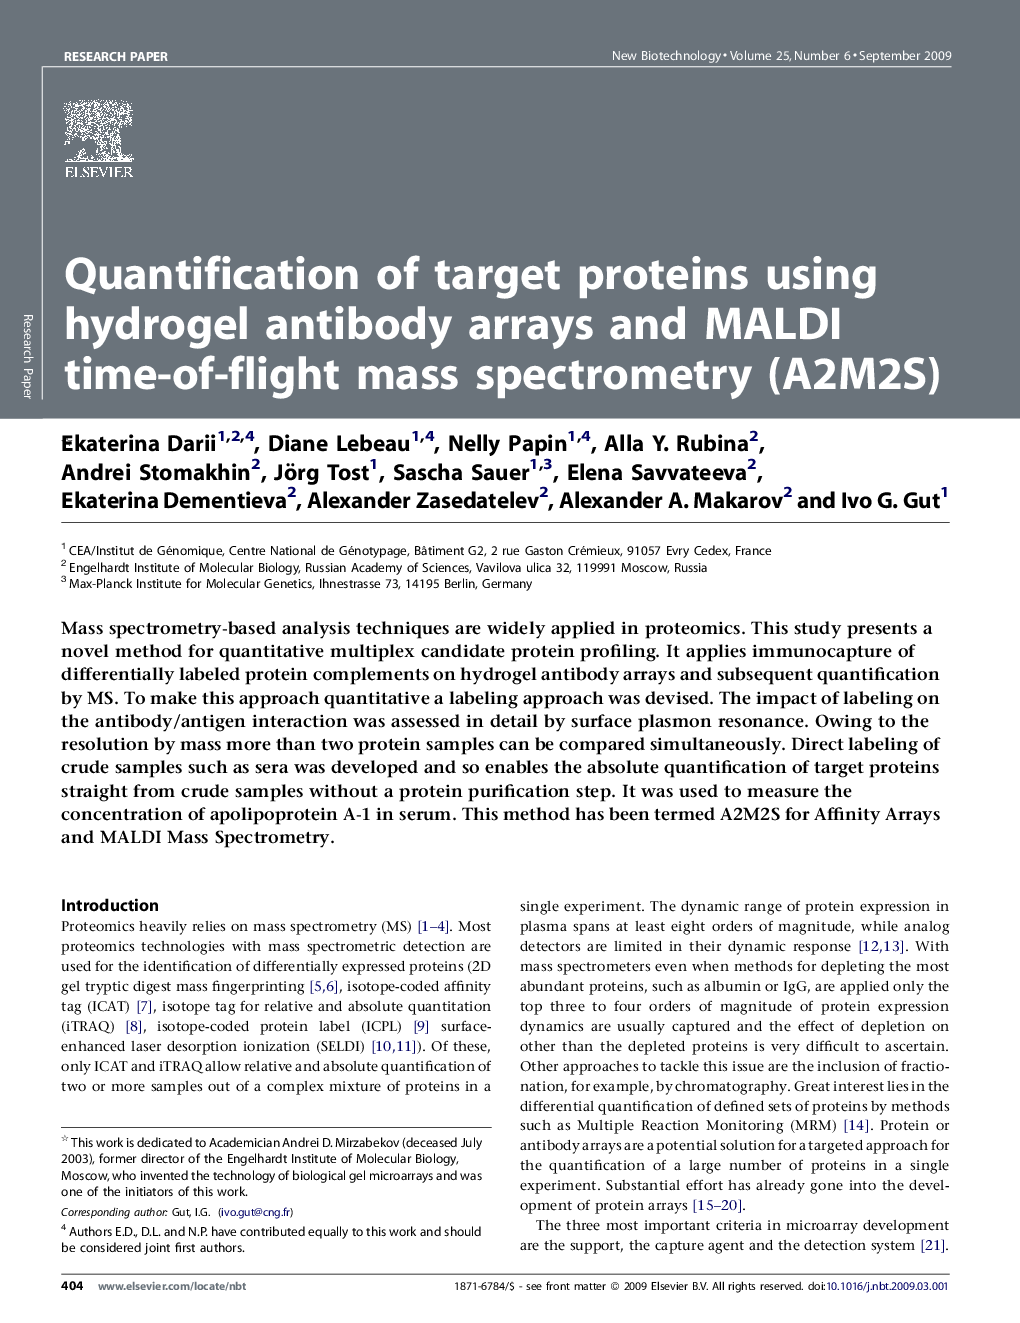 Quantification of target proteins using hydrogel antibody arrays and MALDI time-of-flight mass spectrometry (A2M2S) 